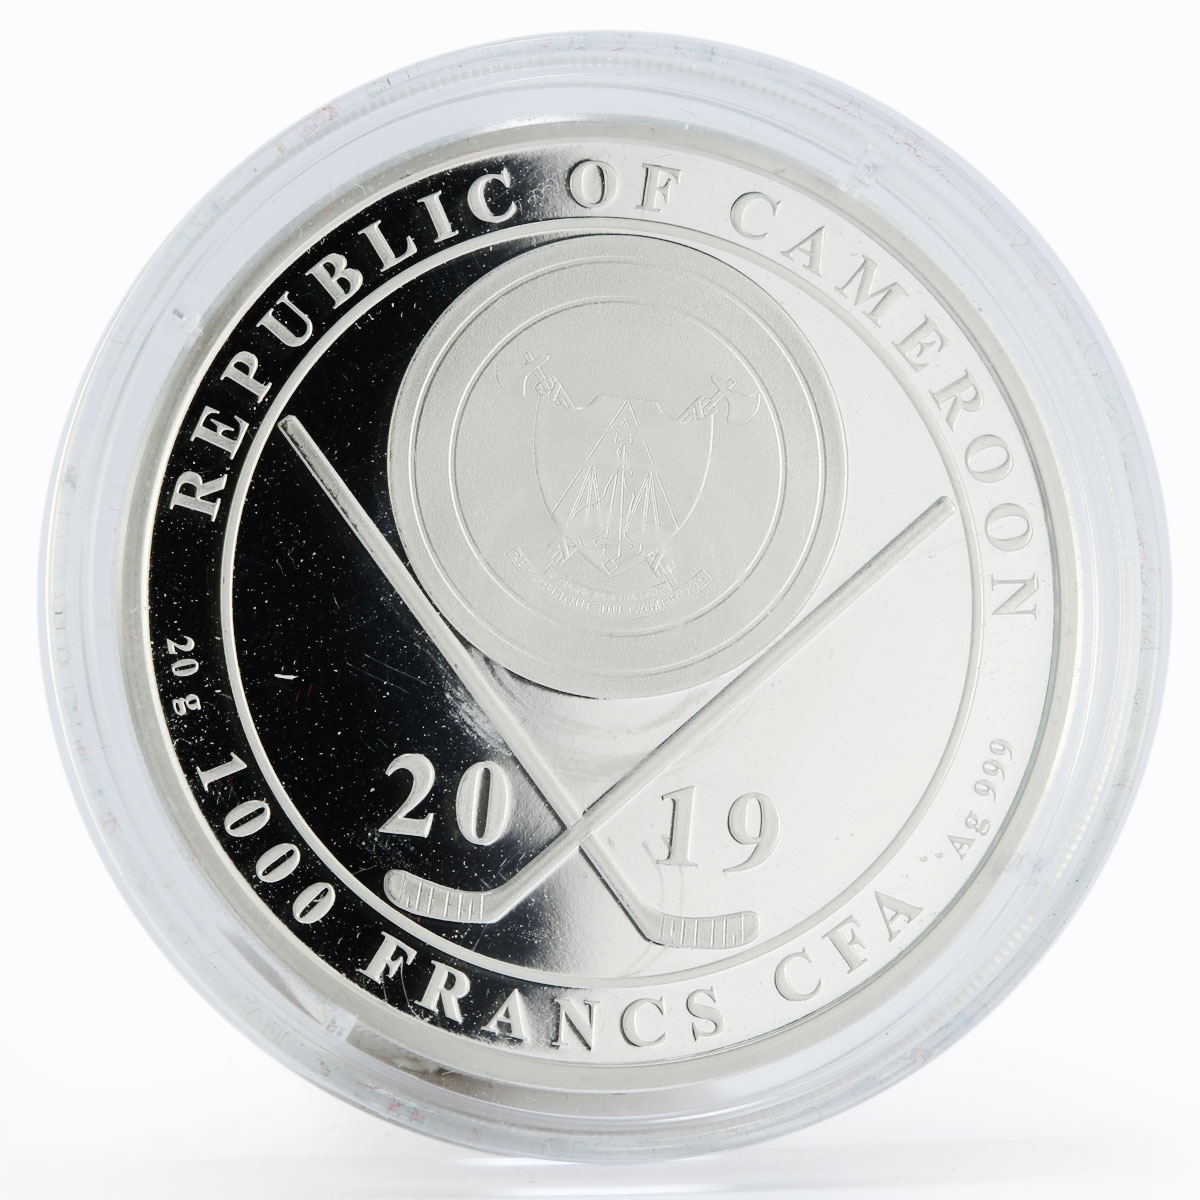 Cameroon 1000 francs Train of Winnings colored silver coin 2019